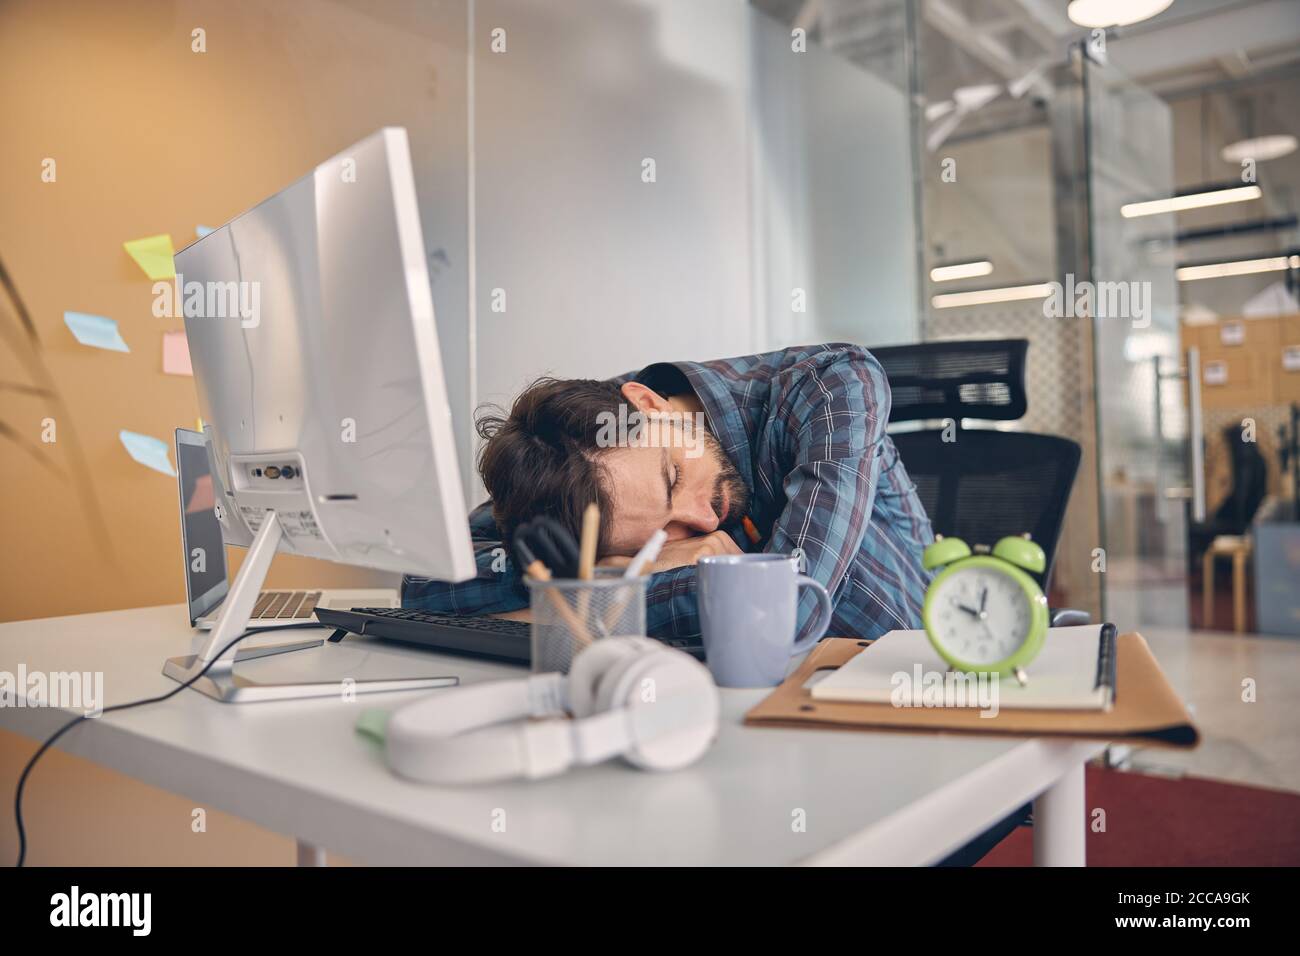 Exhausted overworked young man taking nap in office Stock Photo